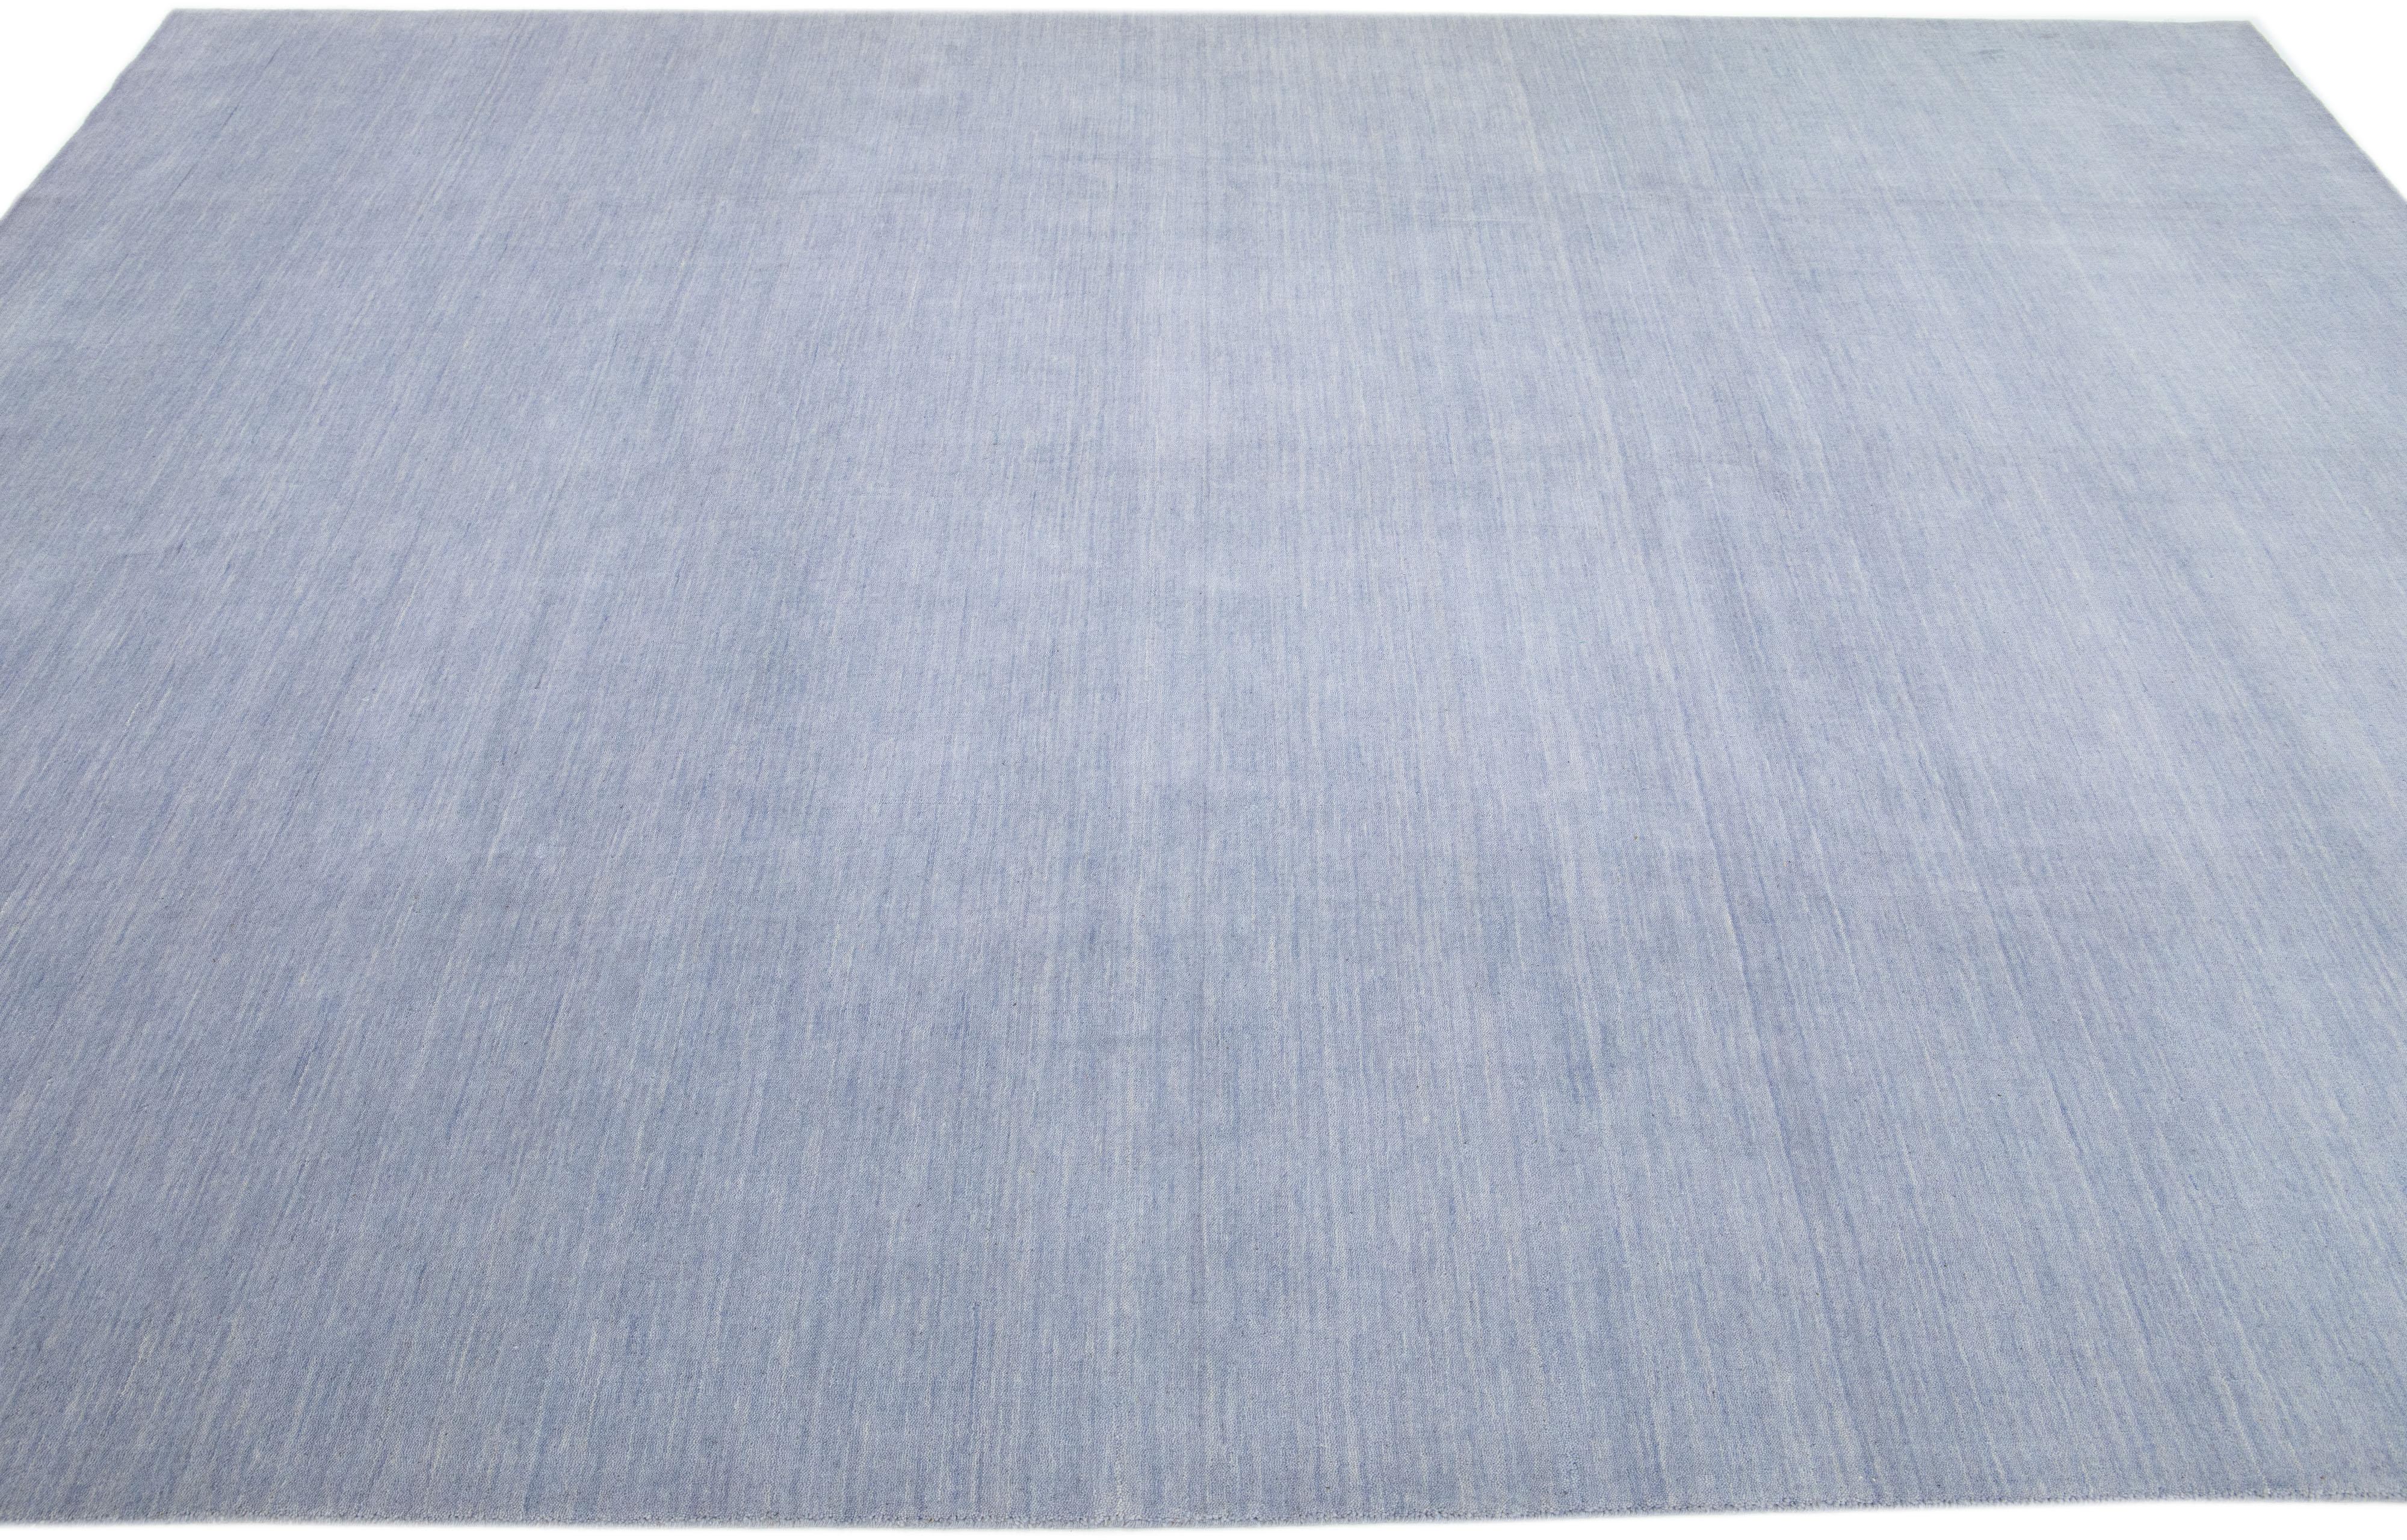 Hand-Woven Modern Gabbeh Style Wool Rug Handmade with a Solid Blue Field For Sale